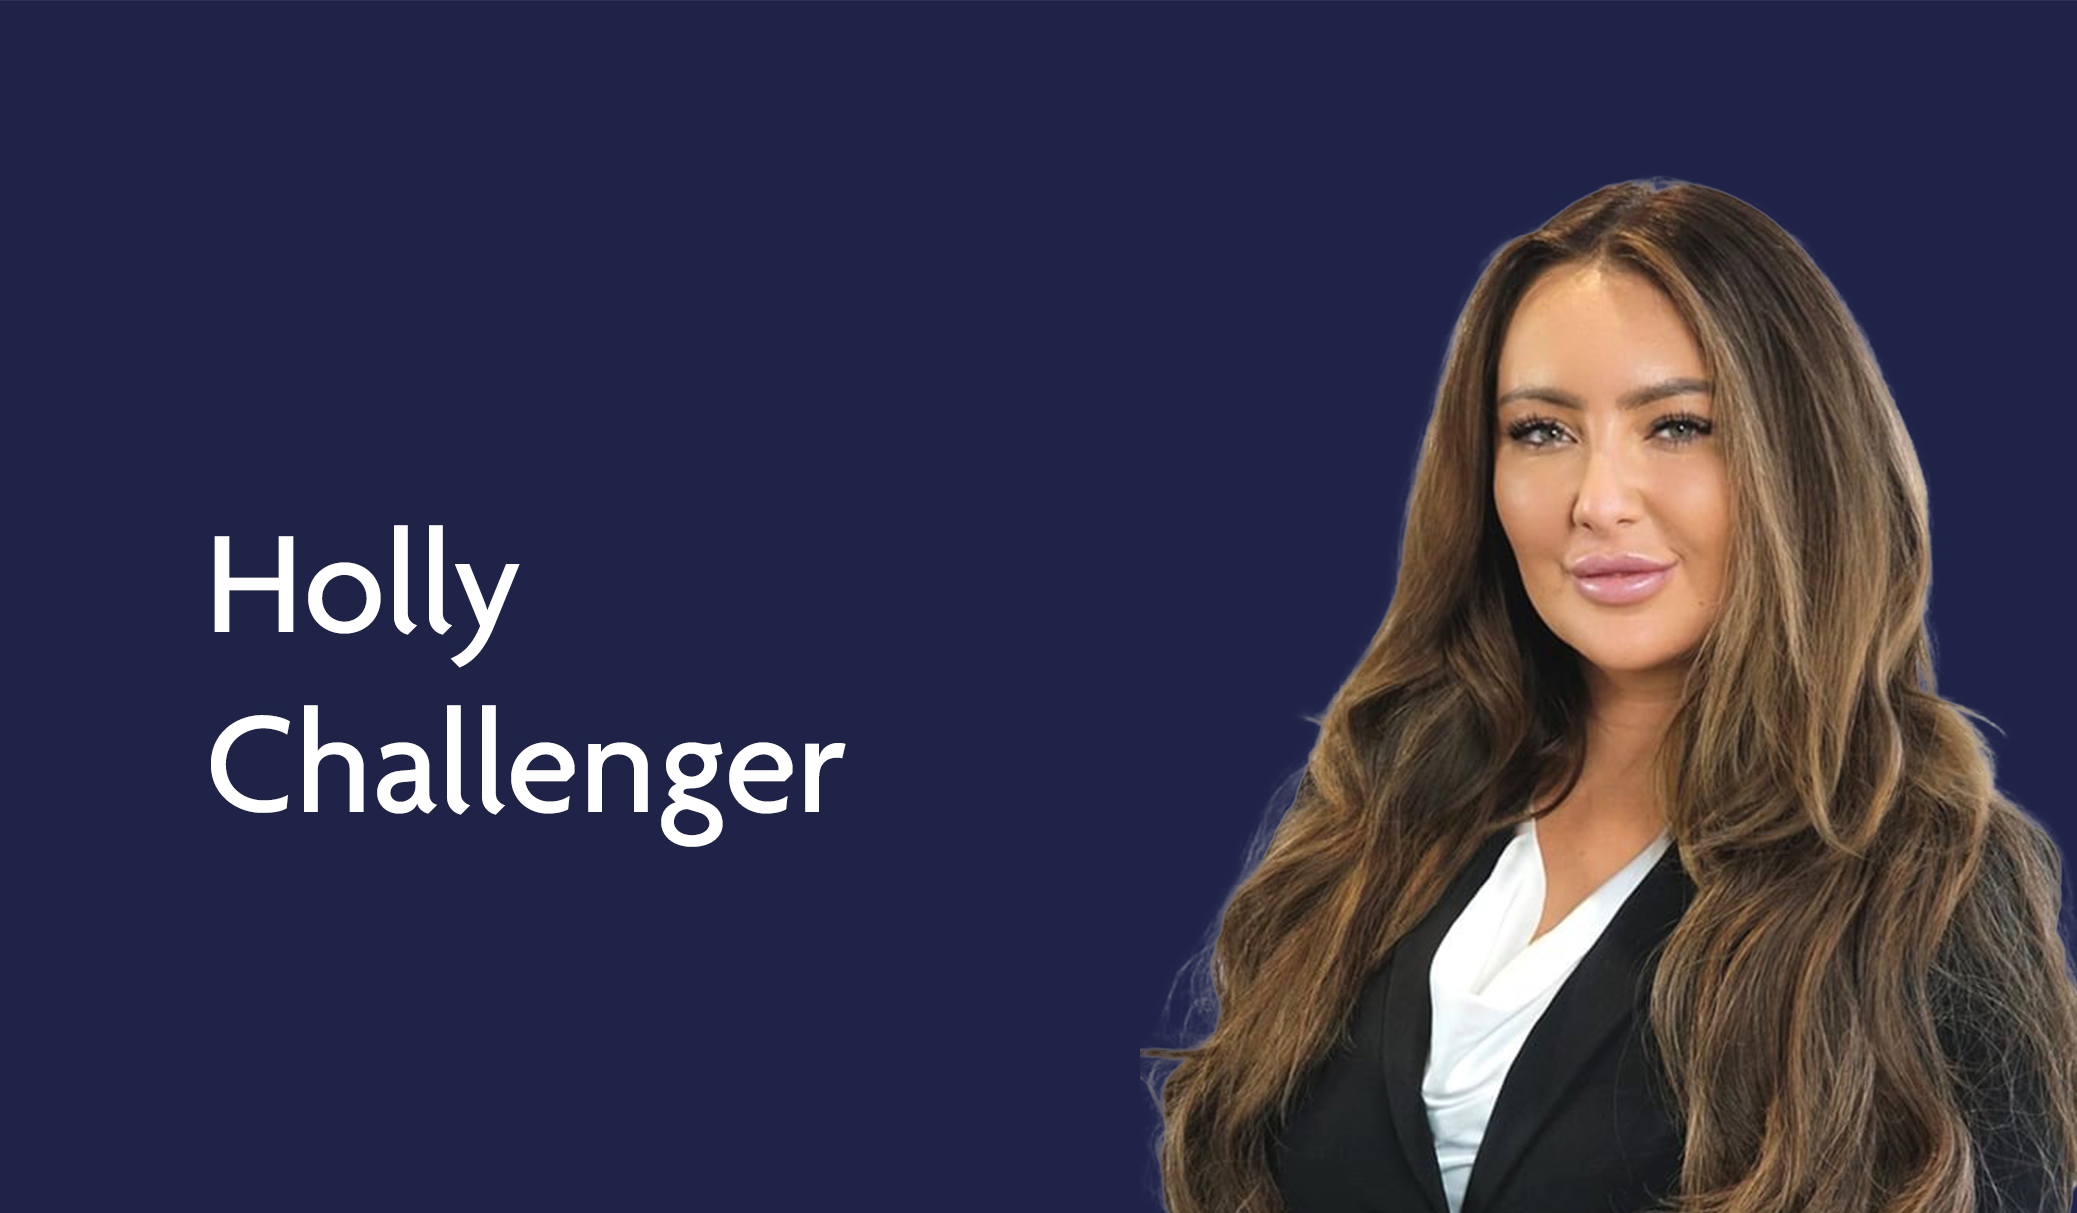 Parklane Plowden’s Holly Challenger Successfully Proves Undue Influence, Resulting in Lifetime Transaction Being Set Aside